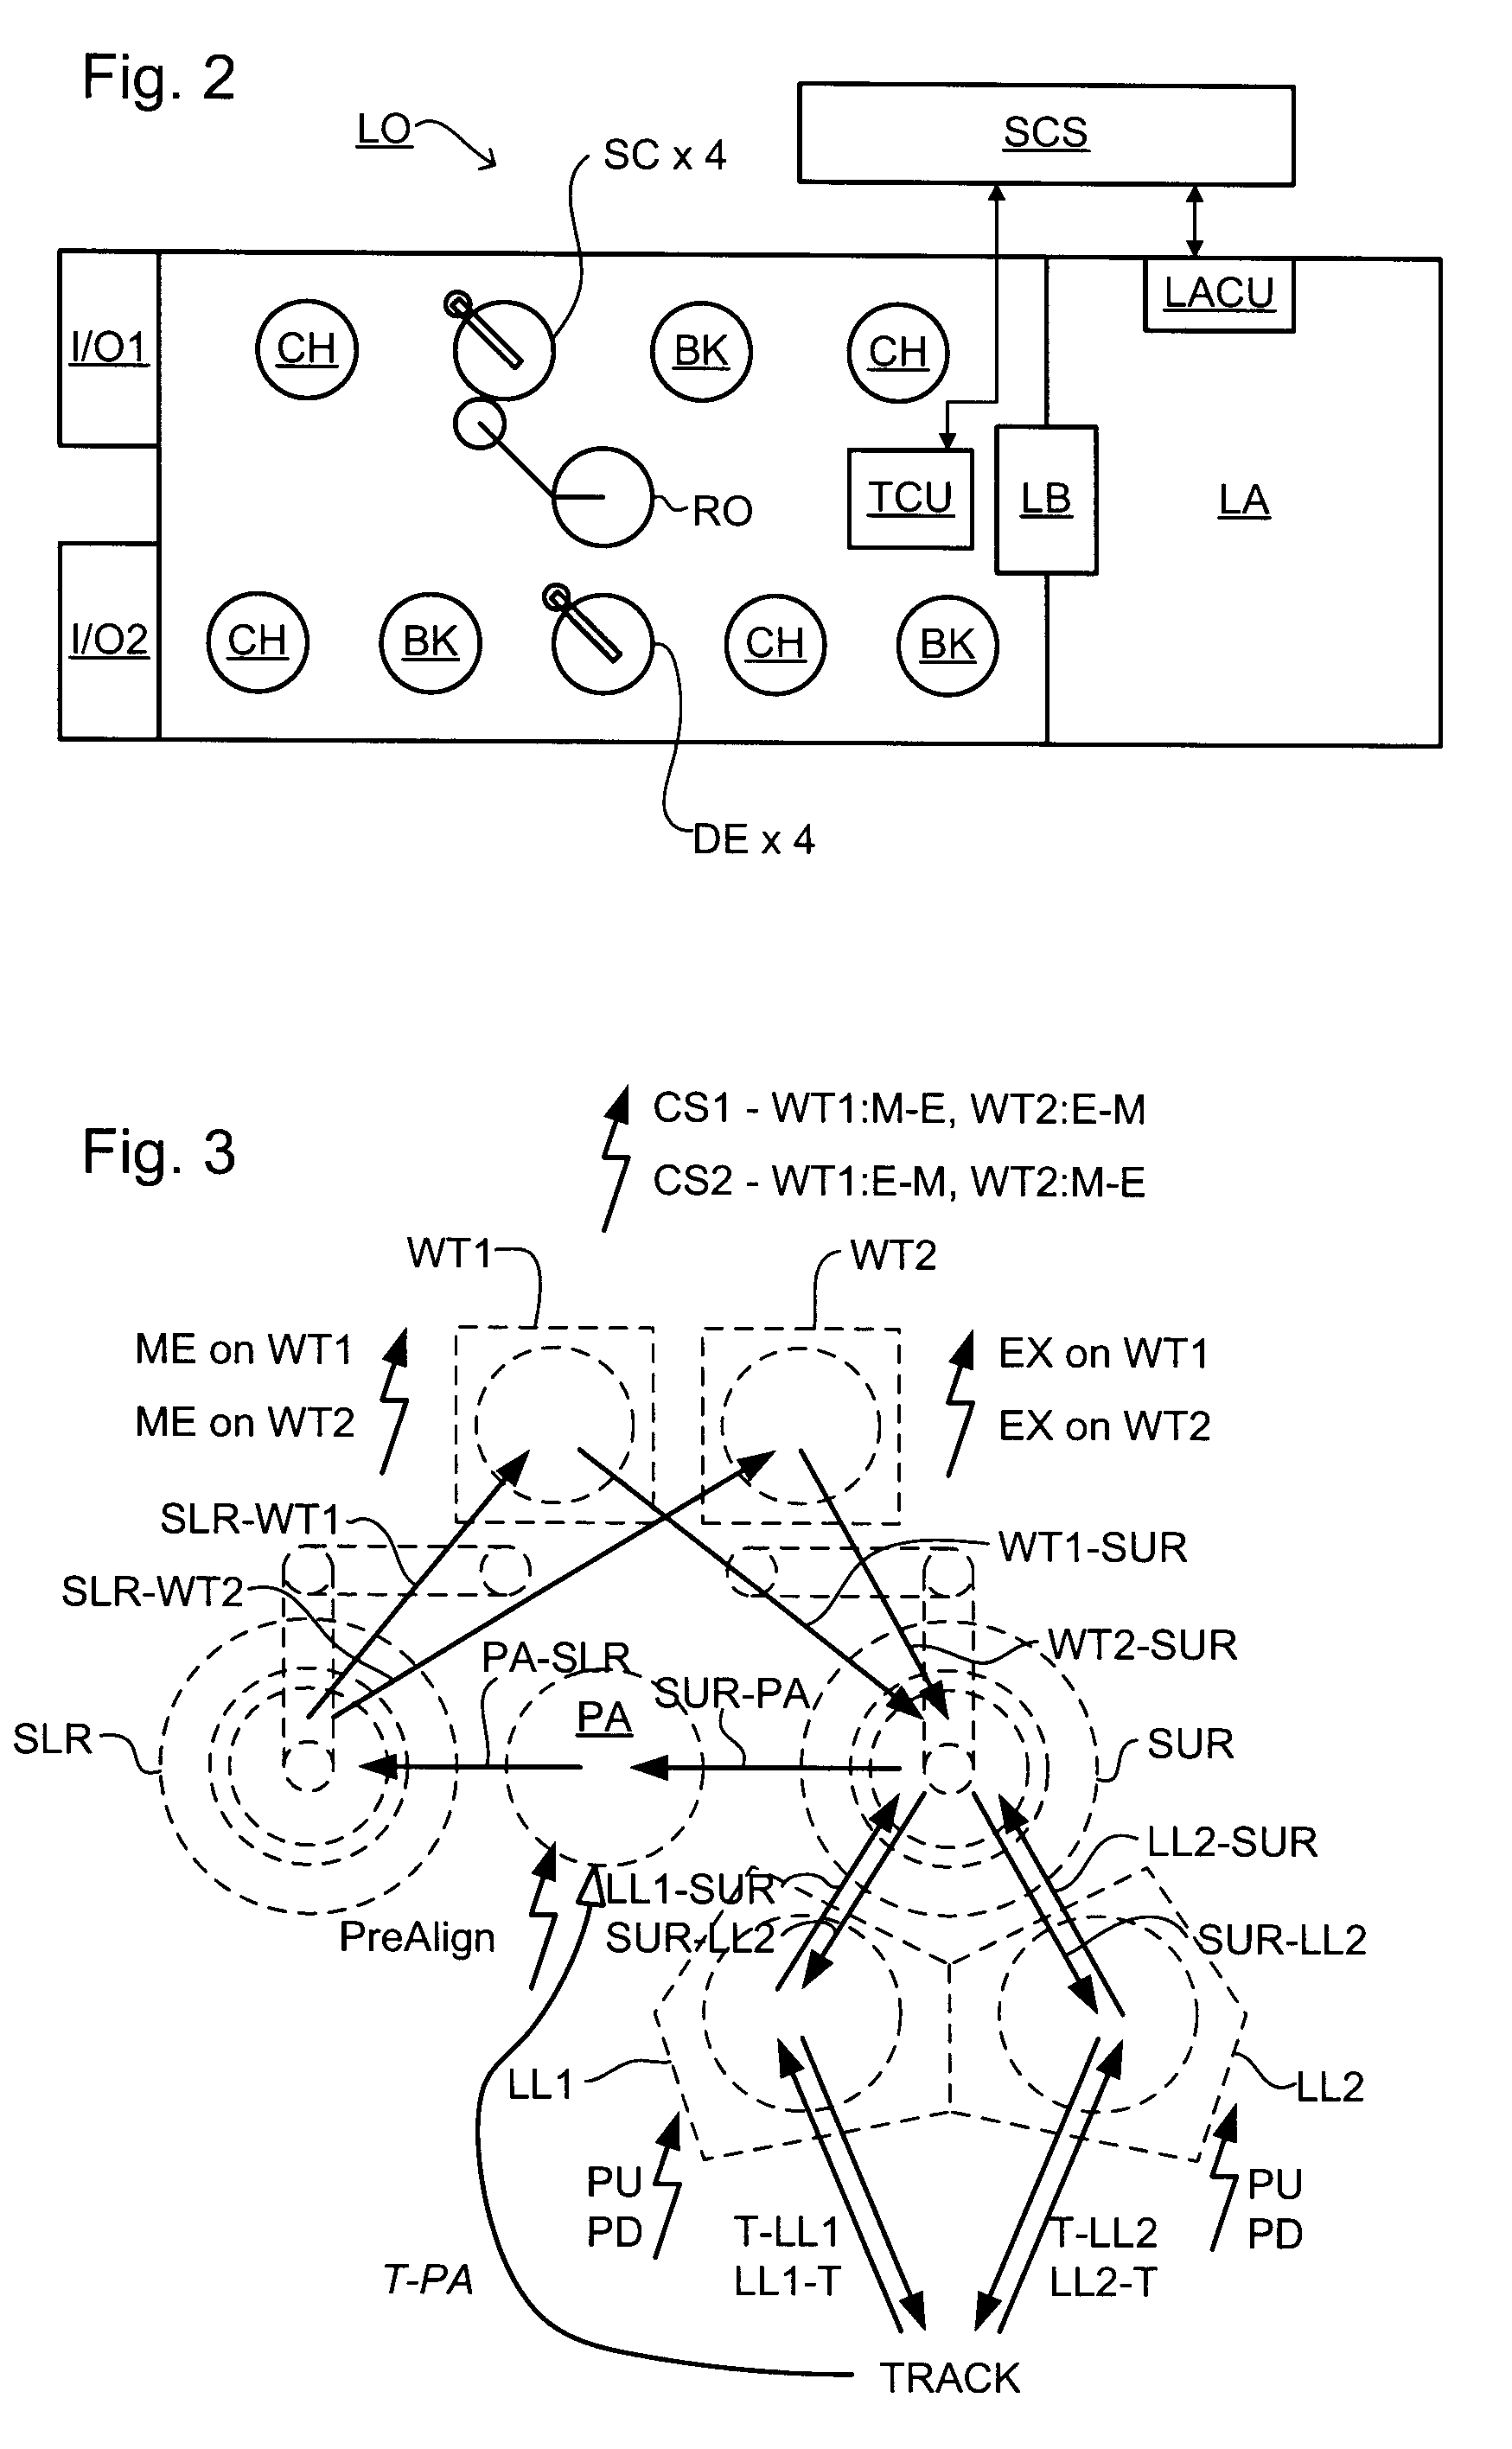 Method of operating a lithographic processing machine, control system, lithographic apparatus, lithographic processing cell, and computer program